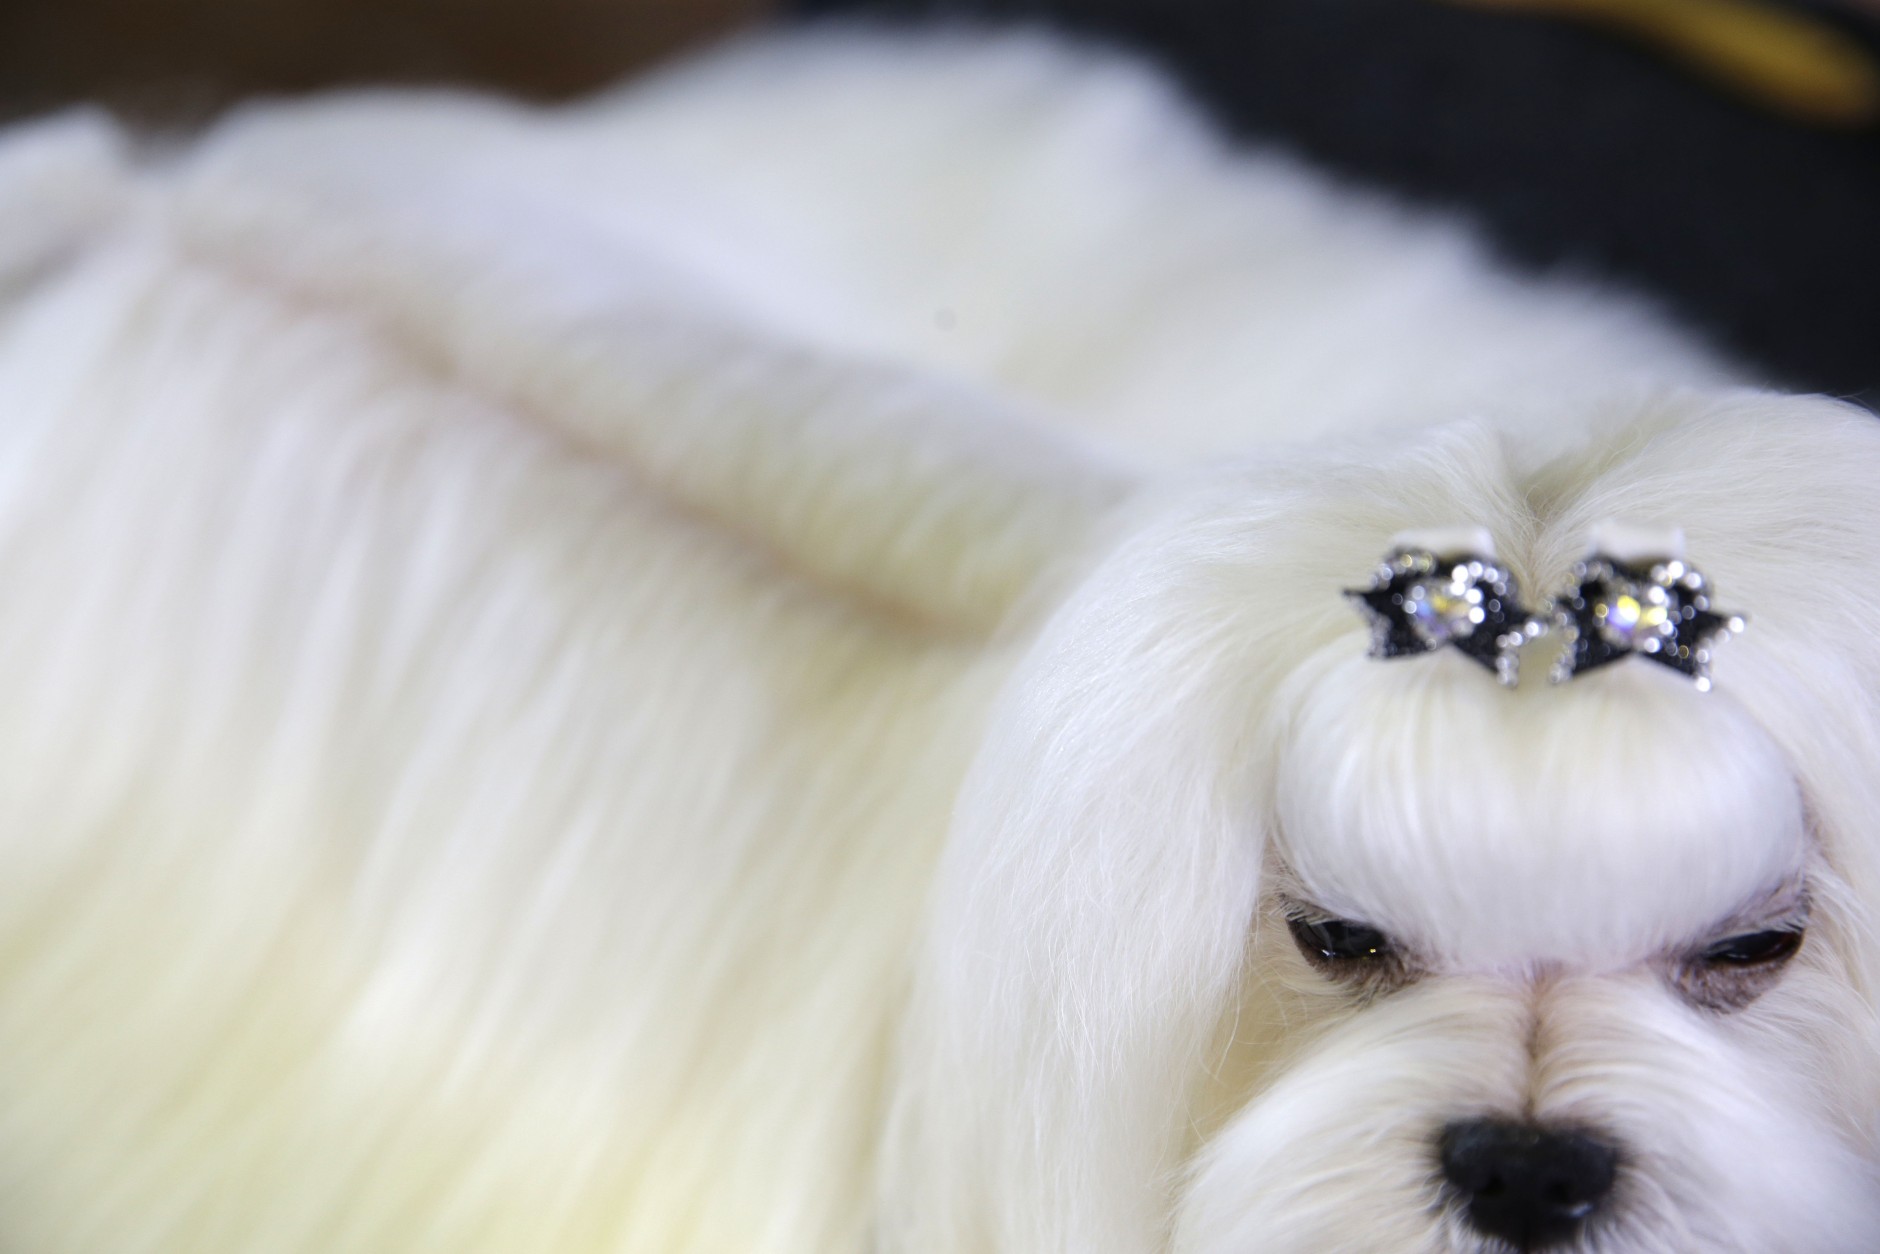 The AKC says a Maltese, another hypoallergenic breed, has fur that needs to be brushed daily. This Maltese, named Smarty, is seen waiting to compete at the Westminster Kennel Club show in New York, Monday, Feb. 16, 2015. (AP Photo/Seth Wenig)